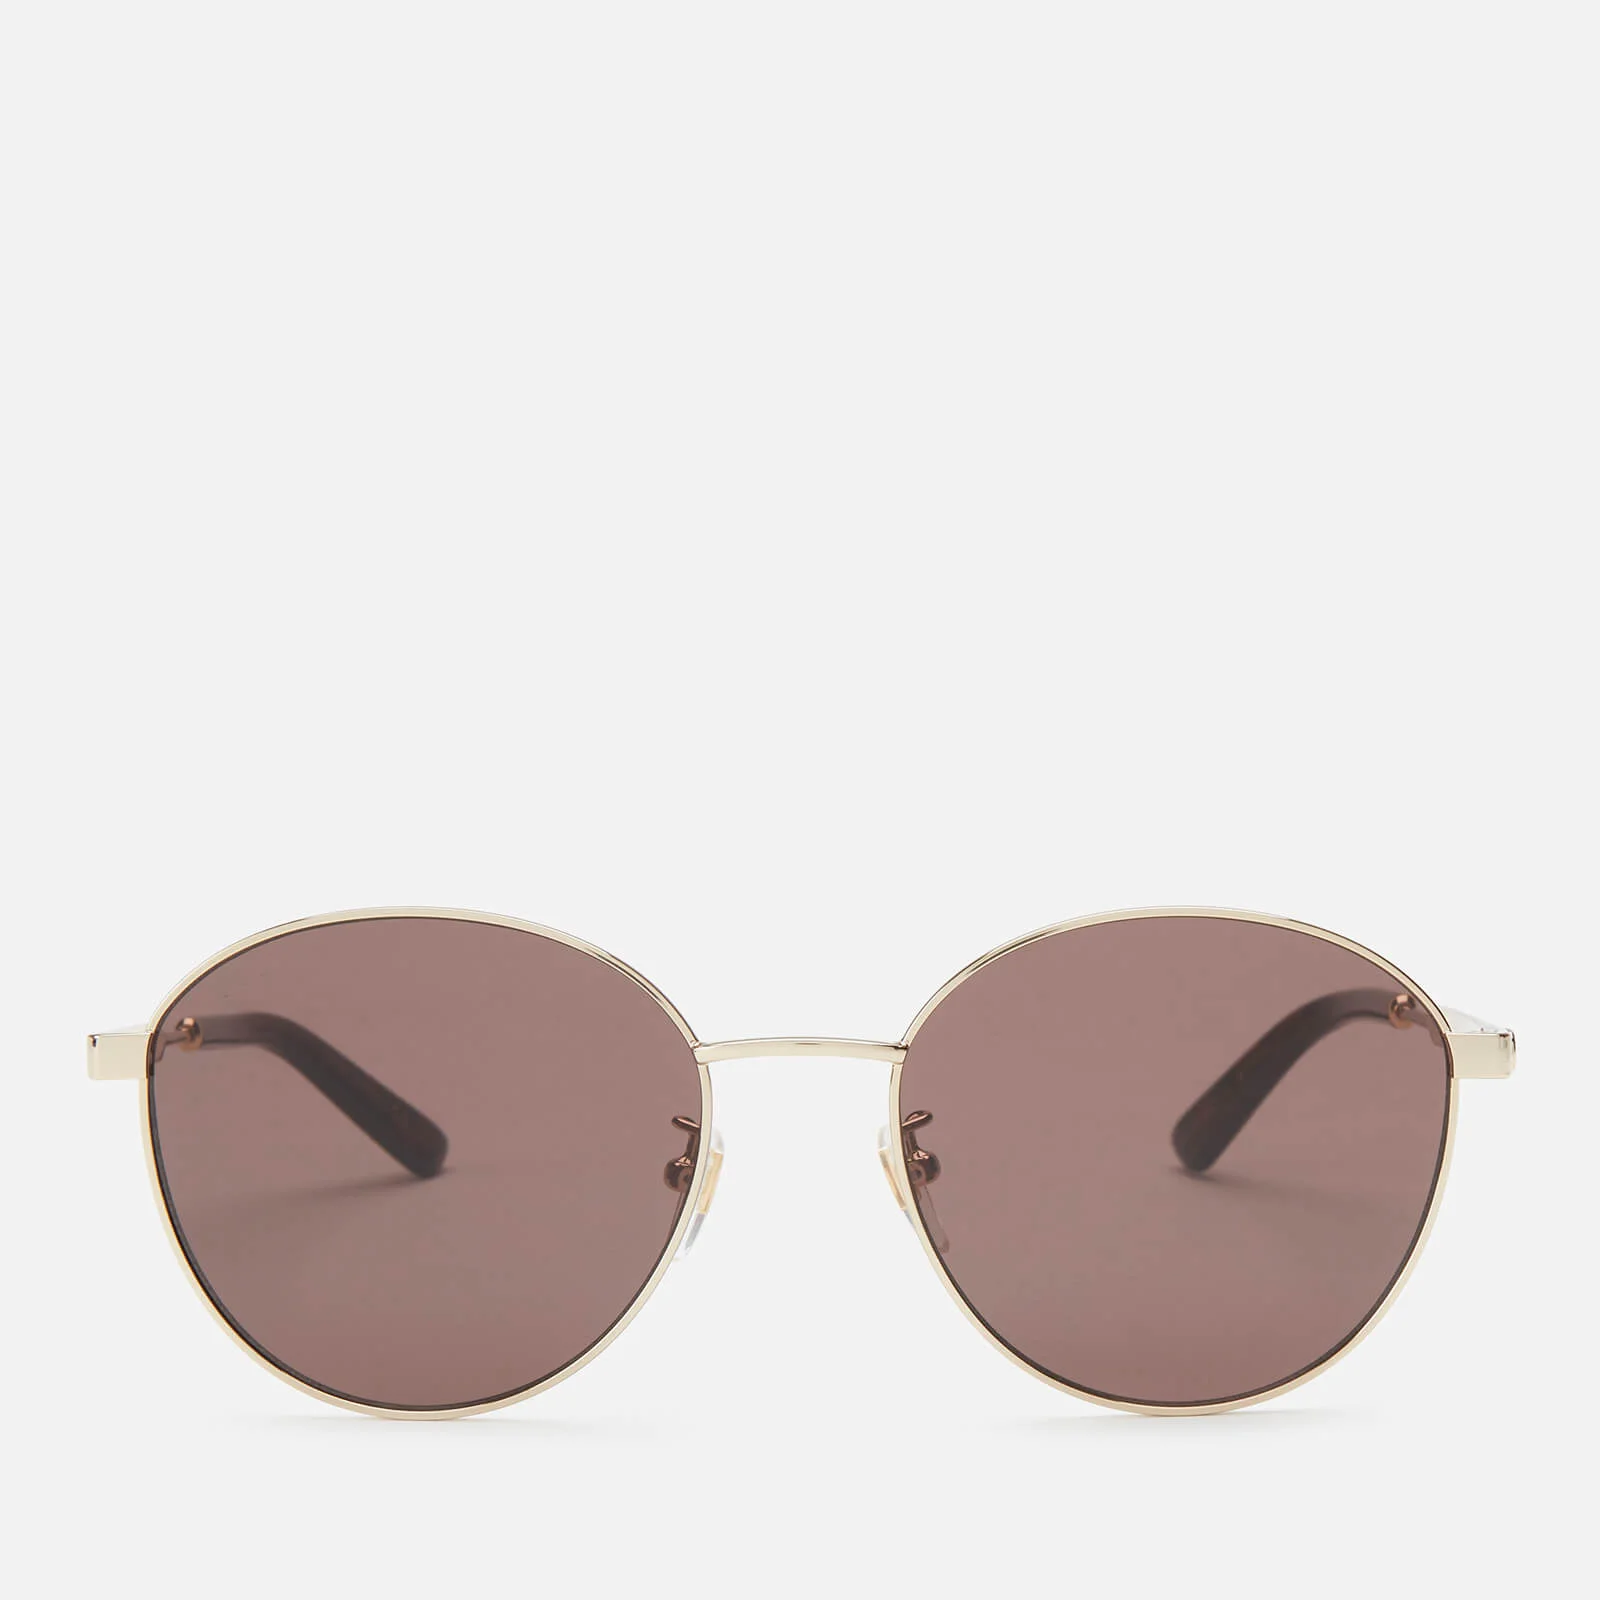 Gucci Women's Round Frame Sunglasses - Gold/Brown Image 1